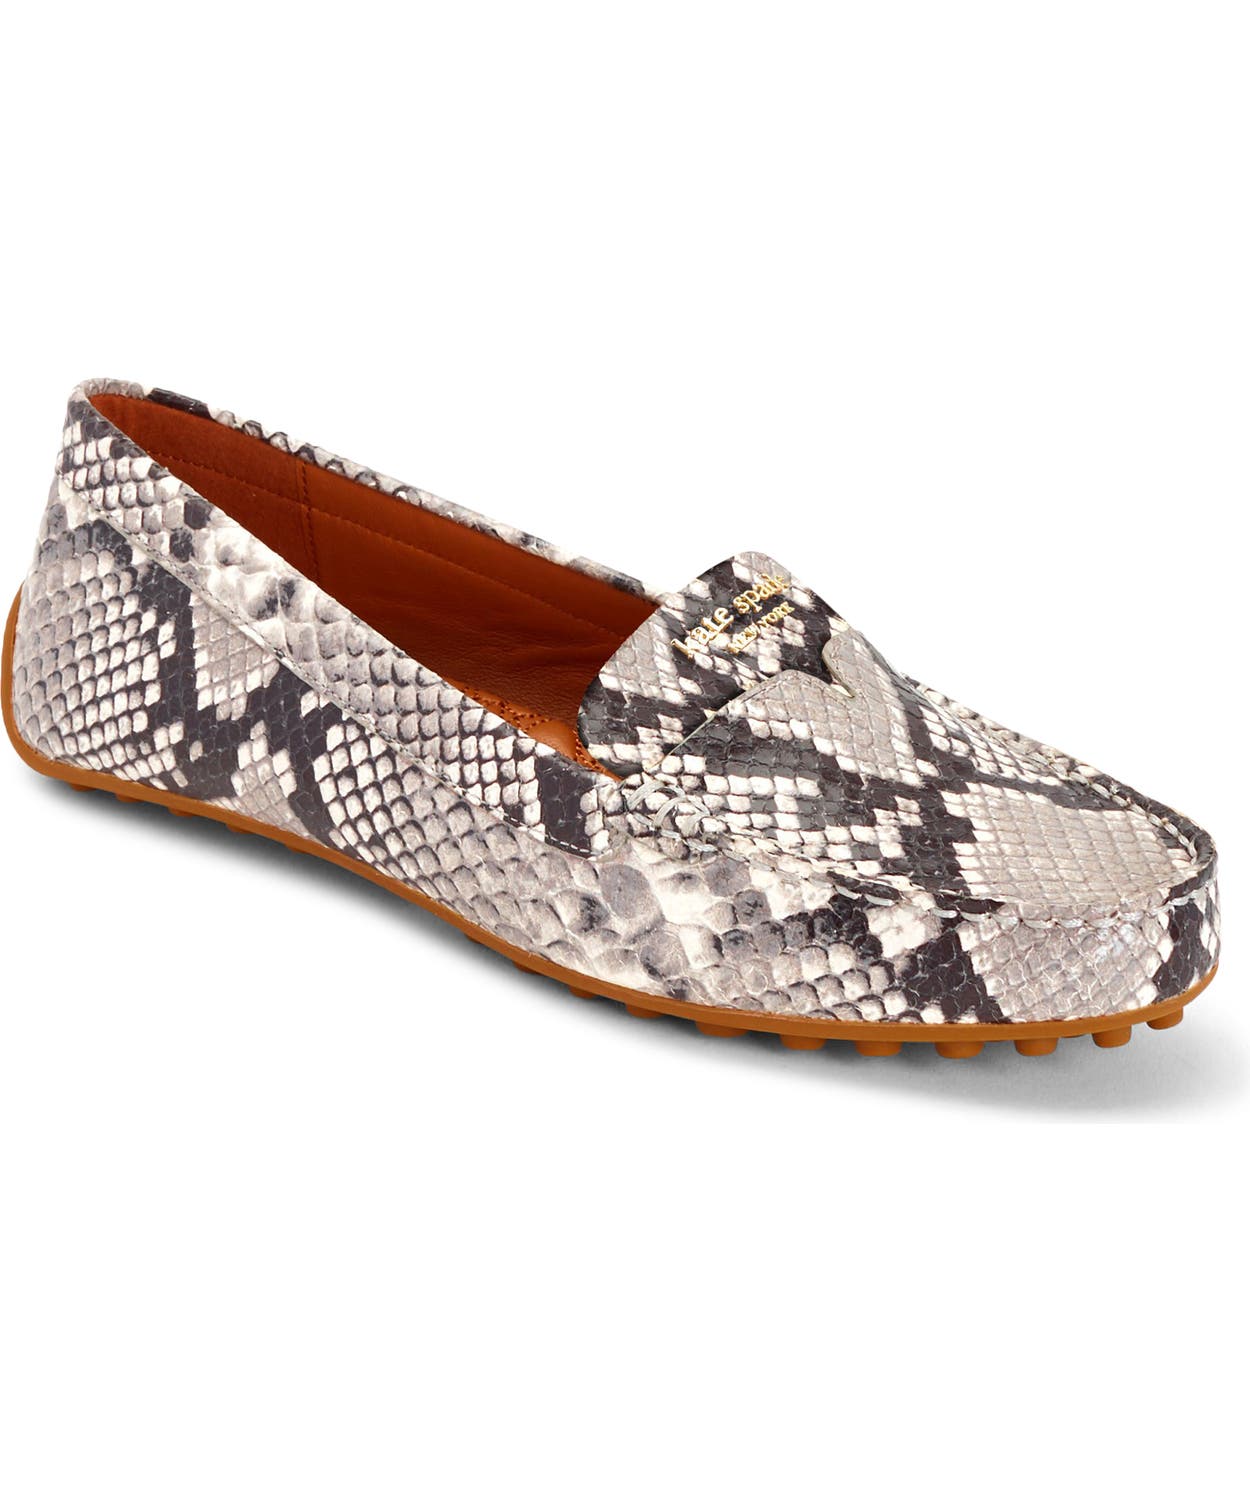 www.couturepoint.com-kate-spade-new-york-womens-grey-leather-snake-print-deck-flats